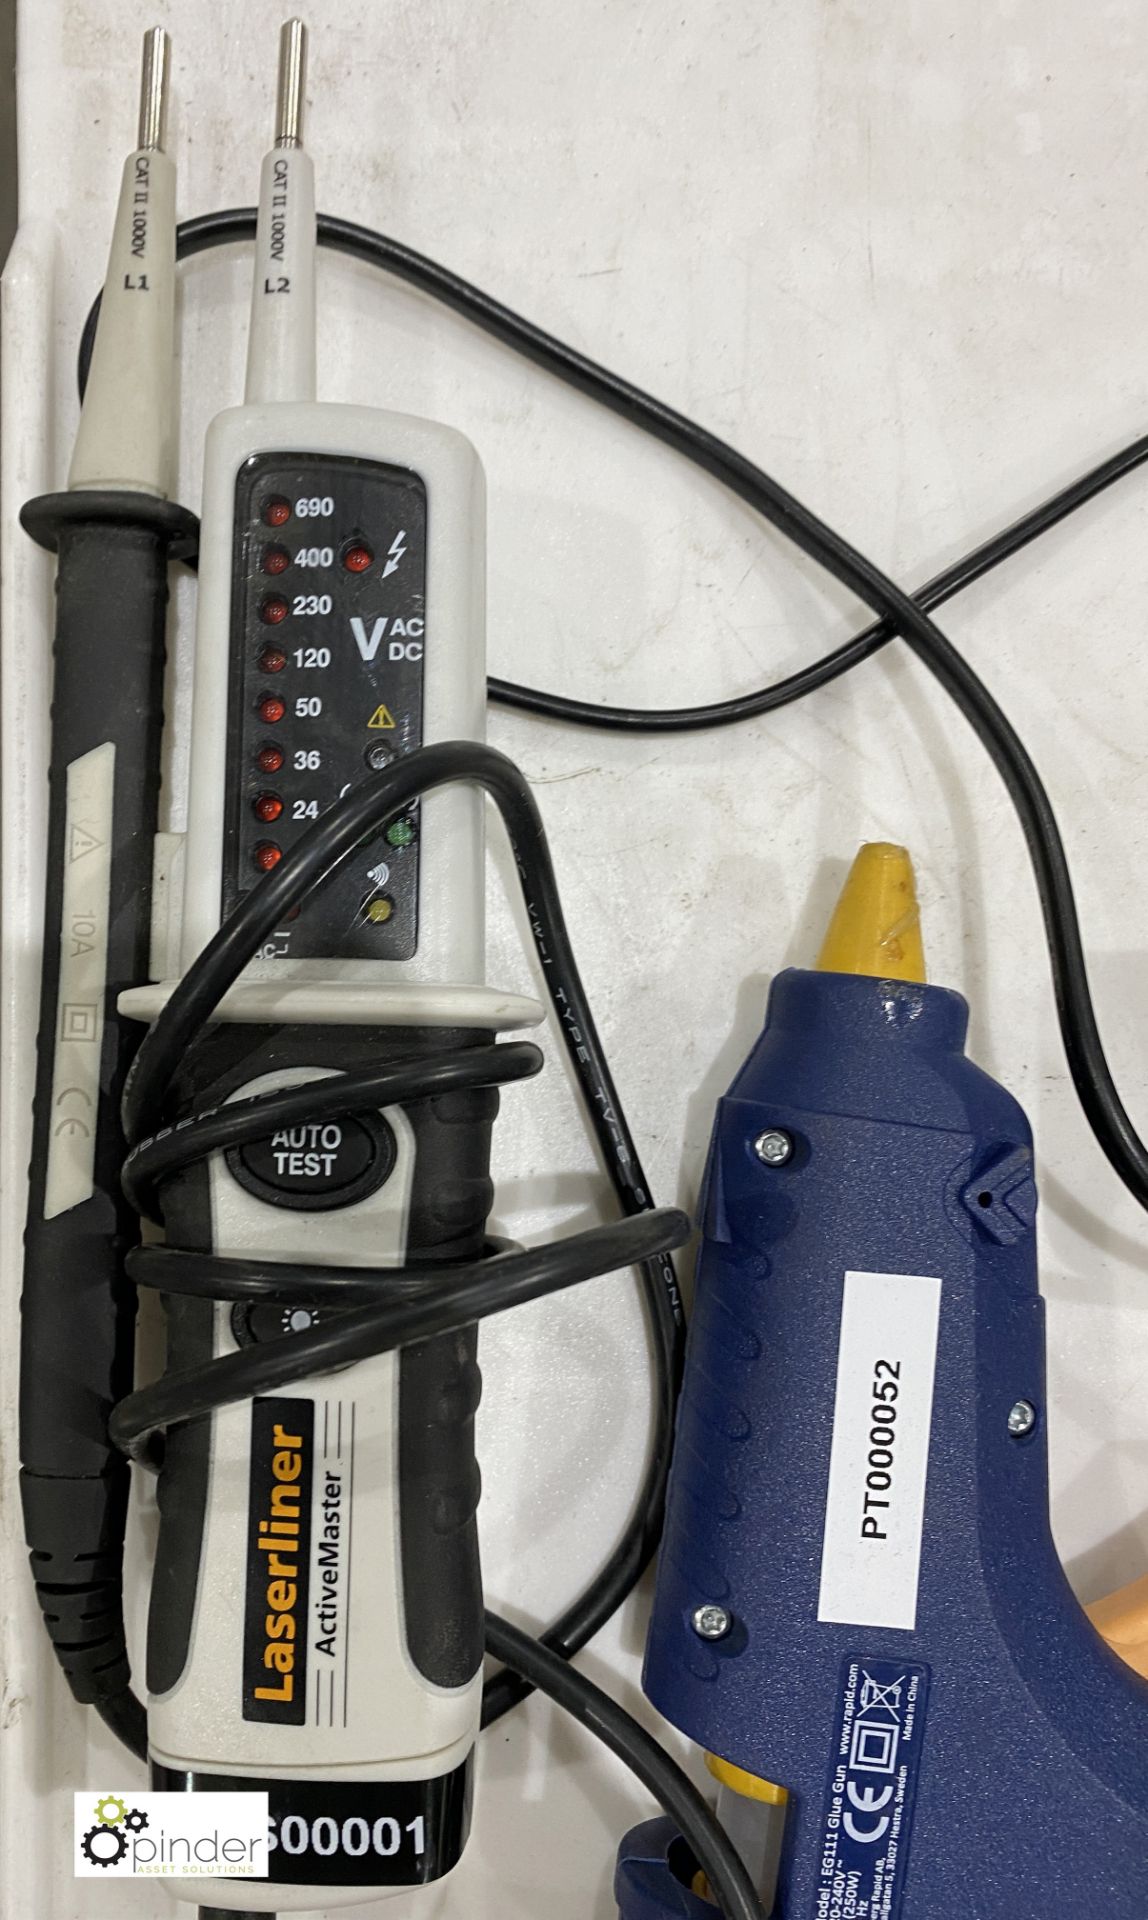 2 Glue Guns, Laser Liner, Voltmeter and Infrared Thermometer - Image 3 of 3